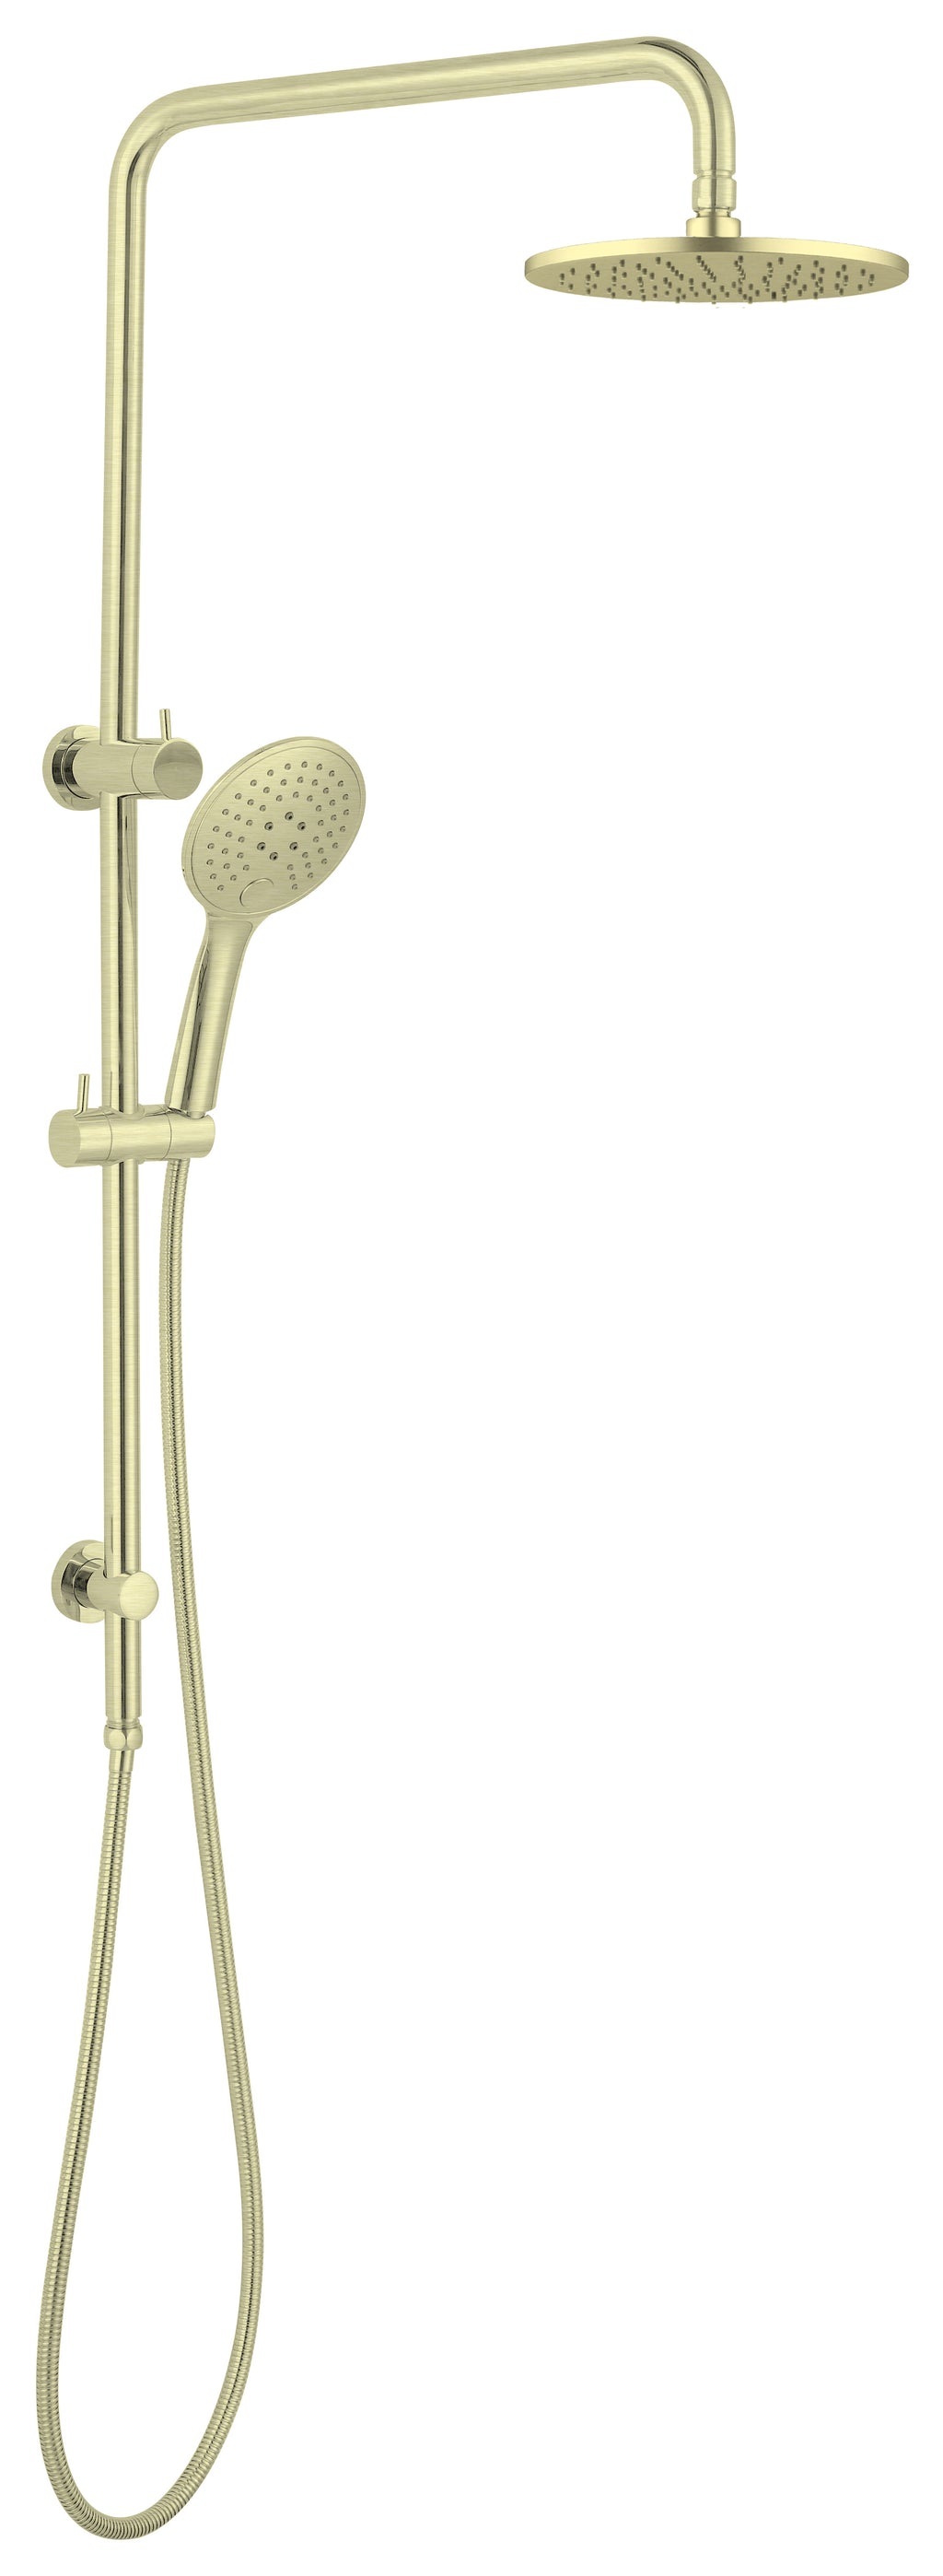 DOLCE-MECCA SHOWER SET YSW2508-05A Brushed Gold